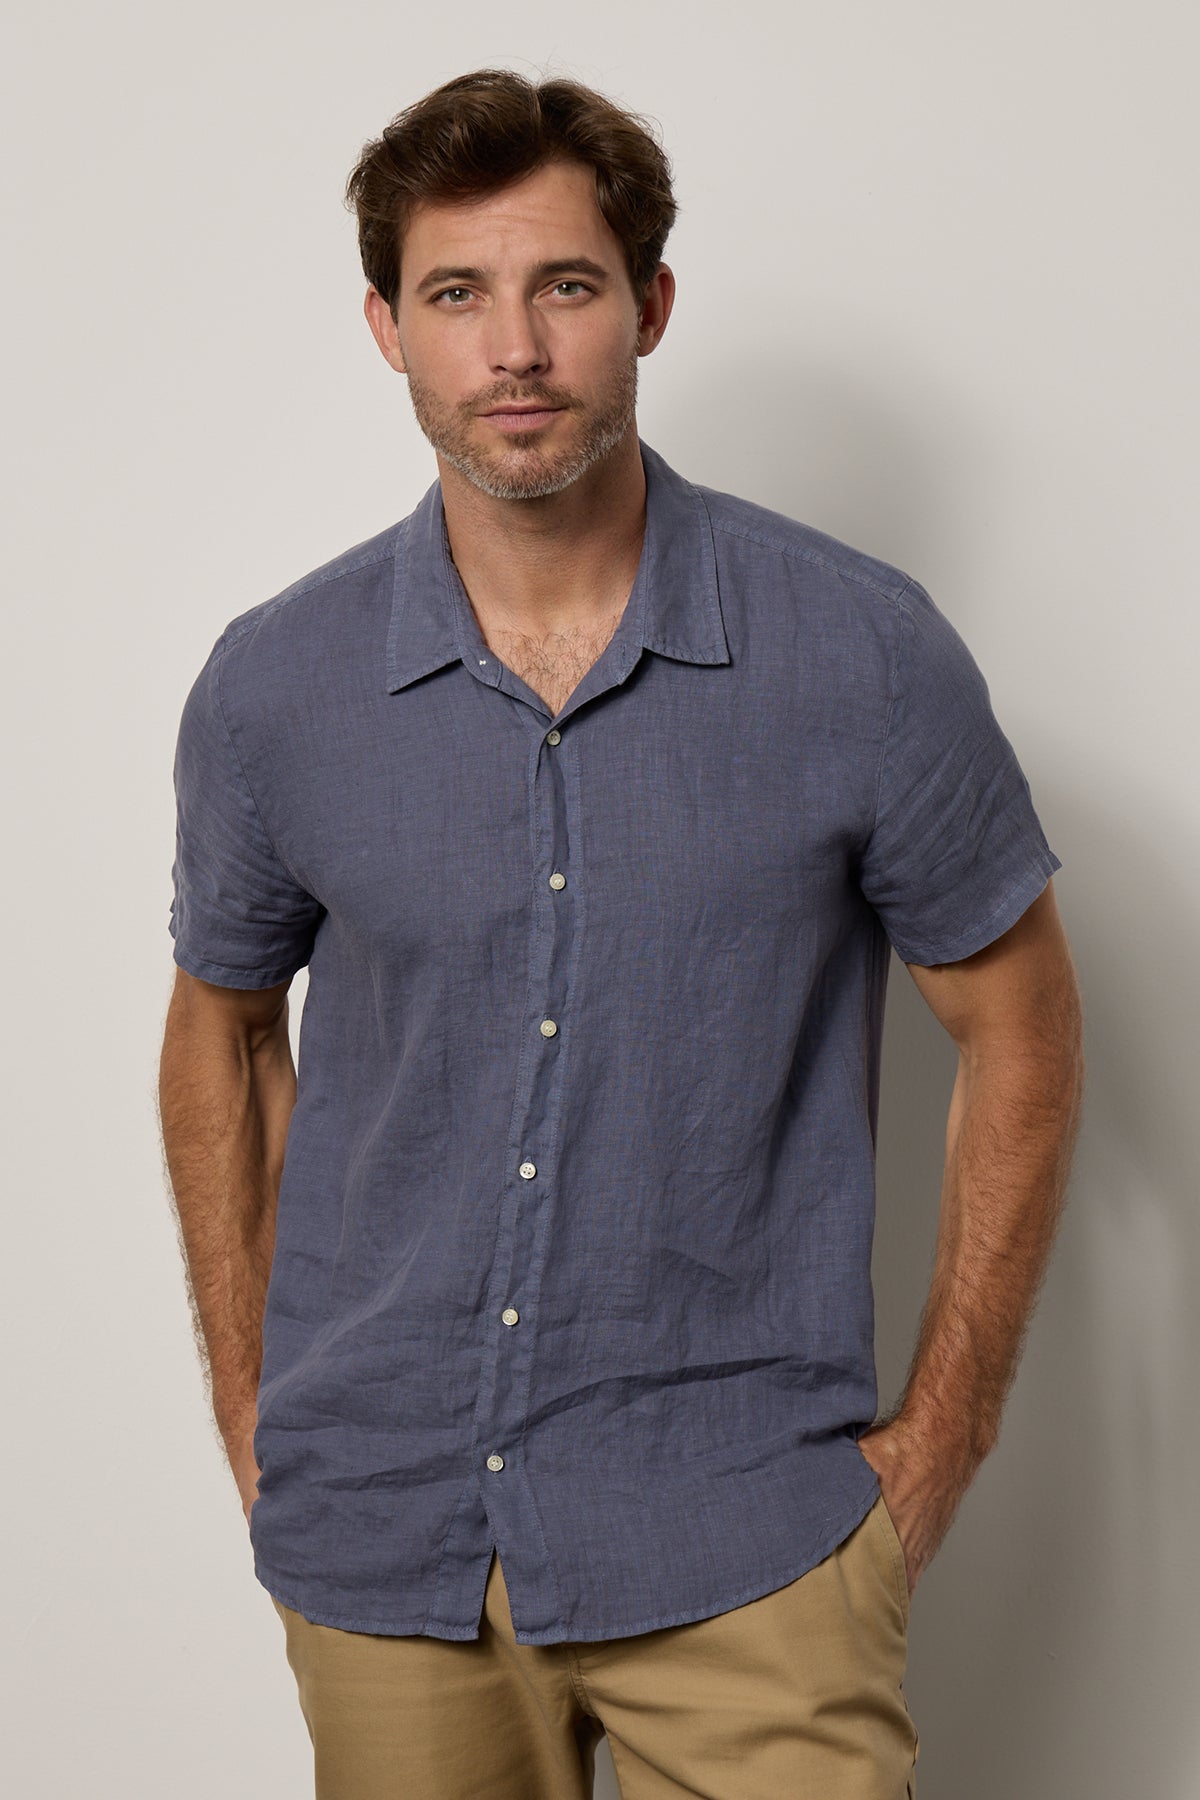 Mackie Button-Up Shirt in baltic blue linen with khaki pants front-26343174897857